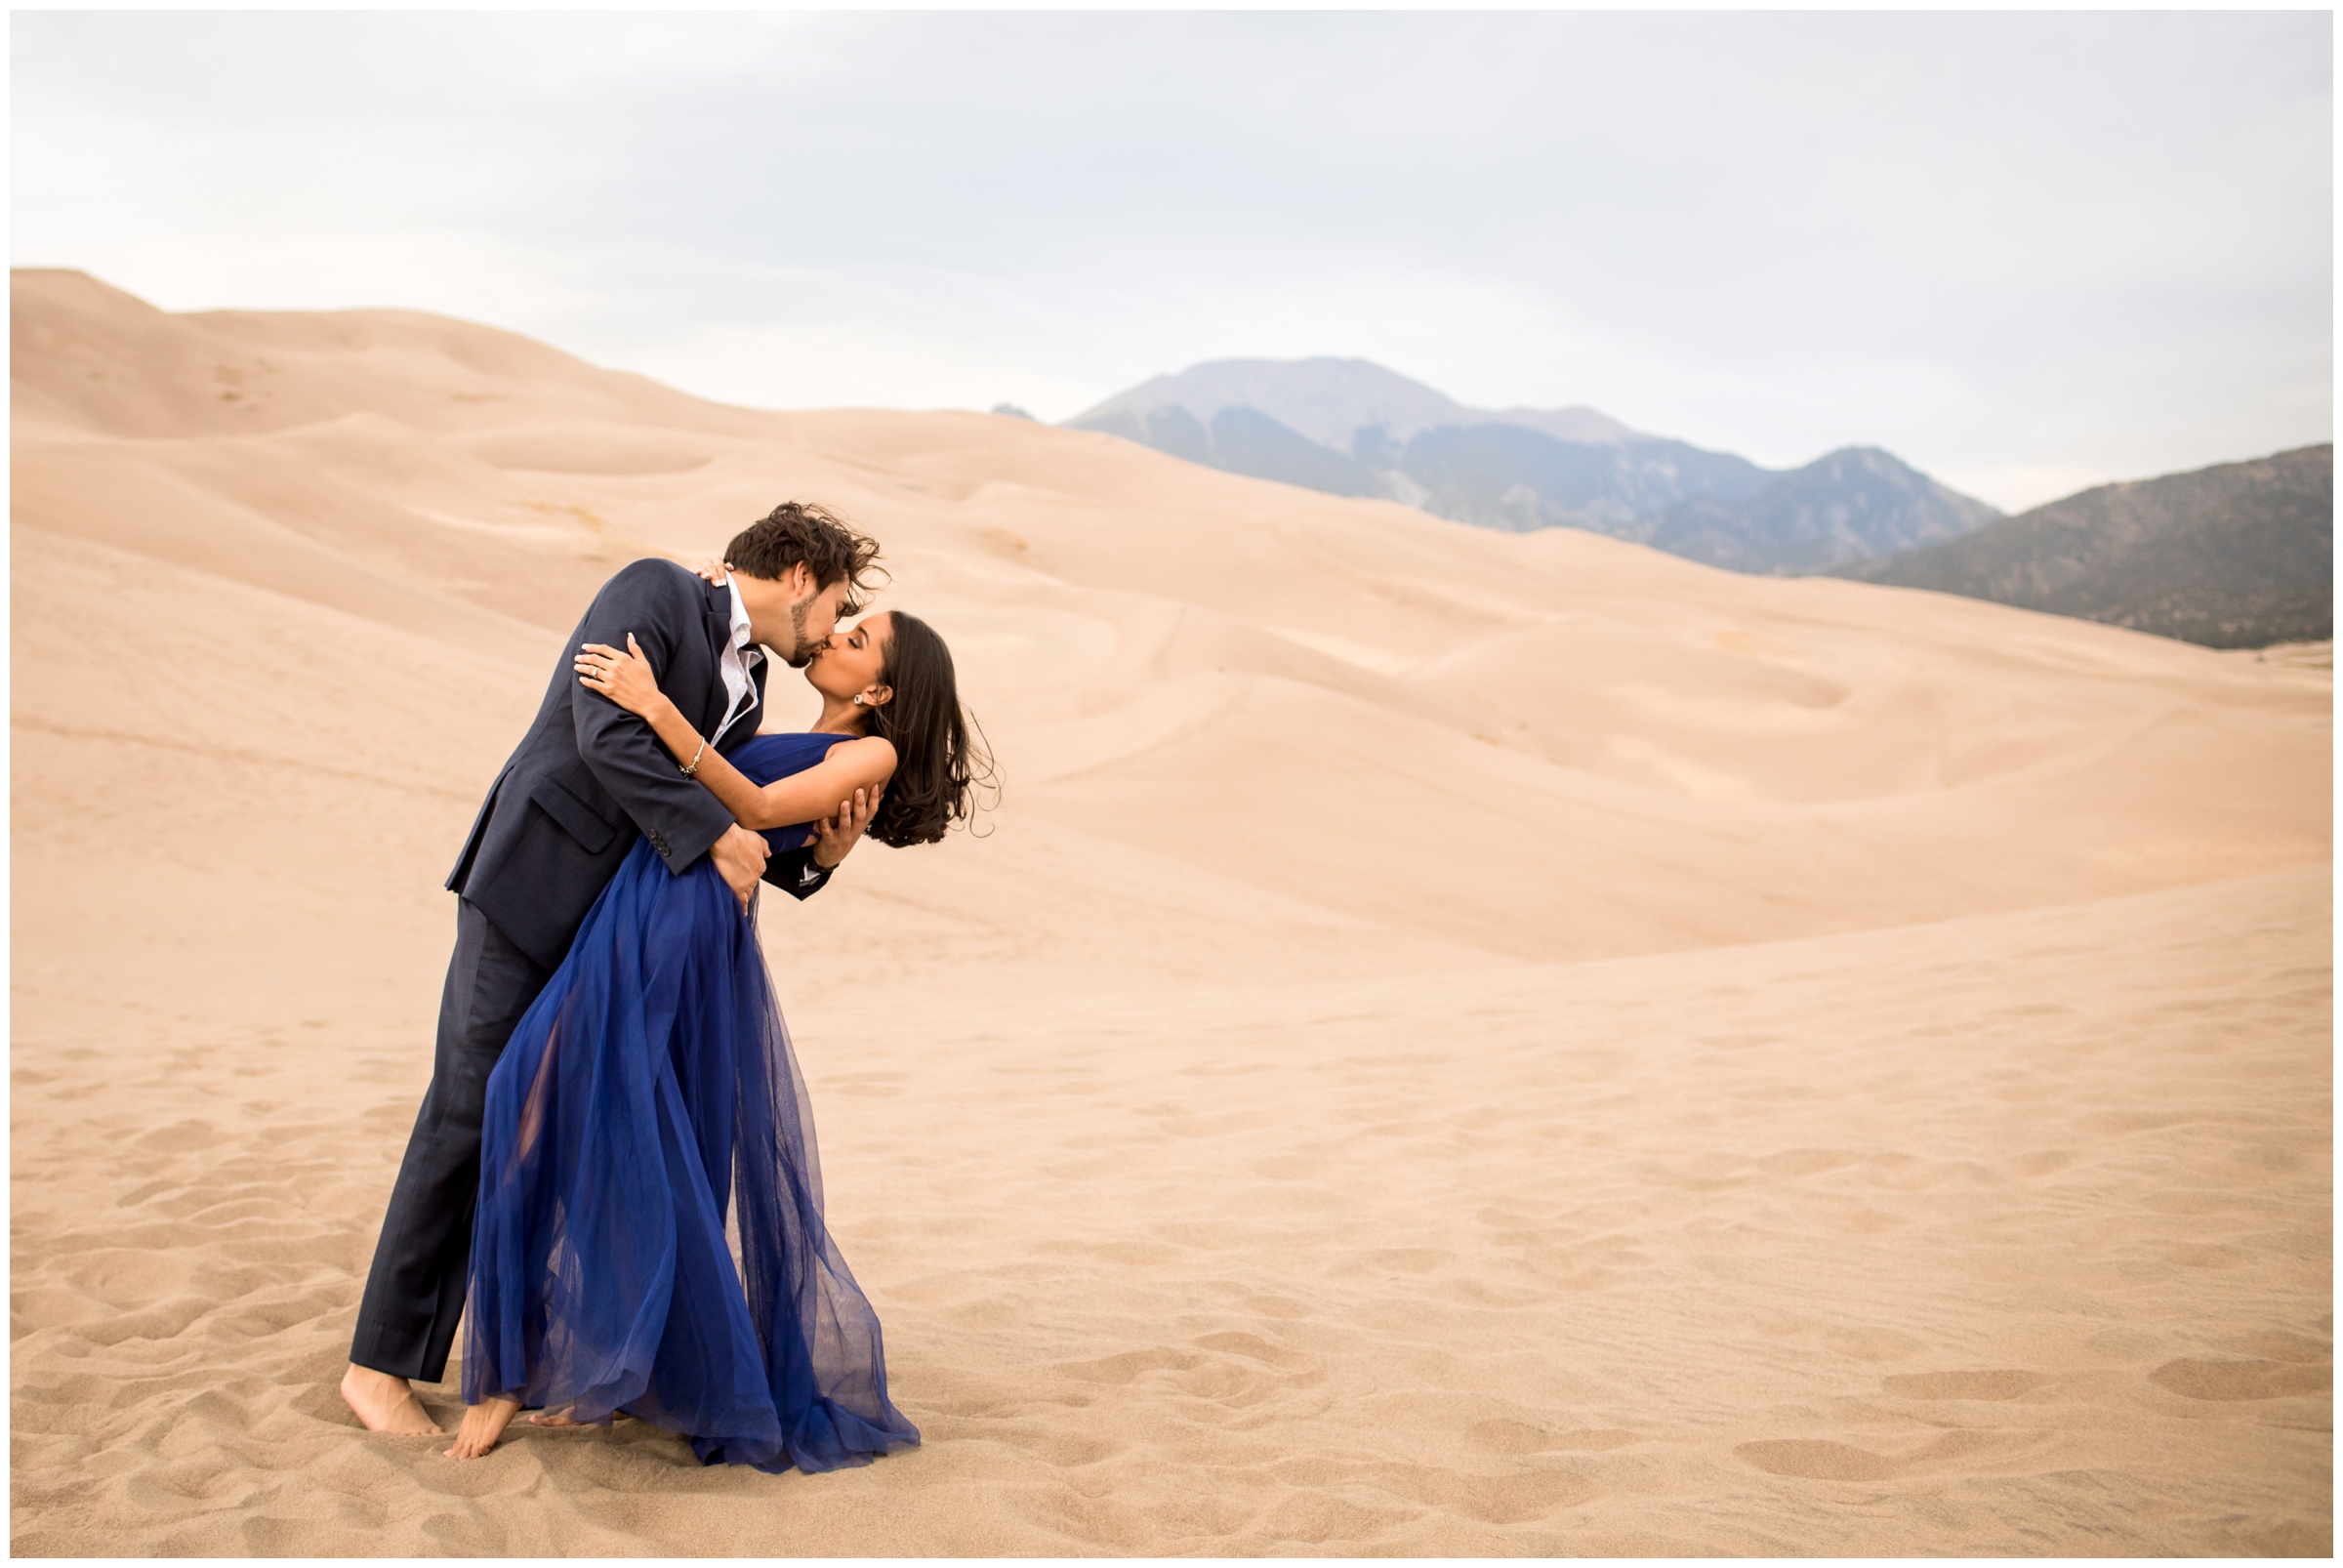 dressy engagement outfit inspiration at Colorado sand dunes